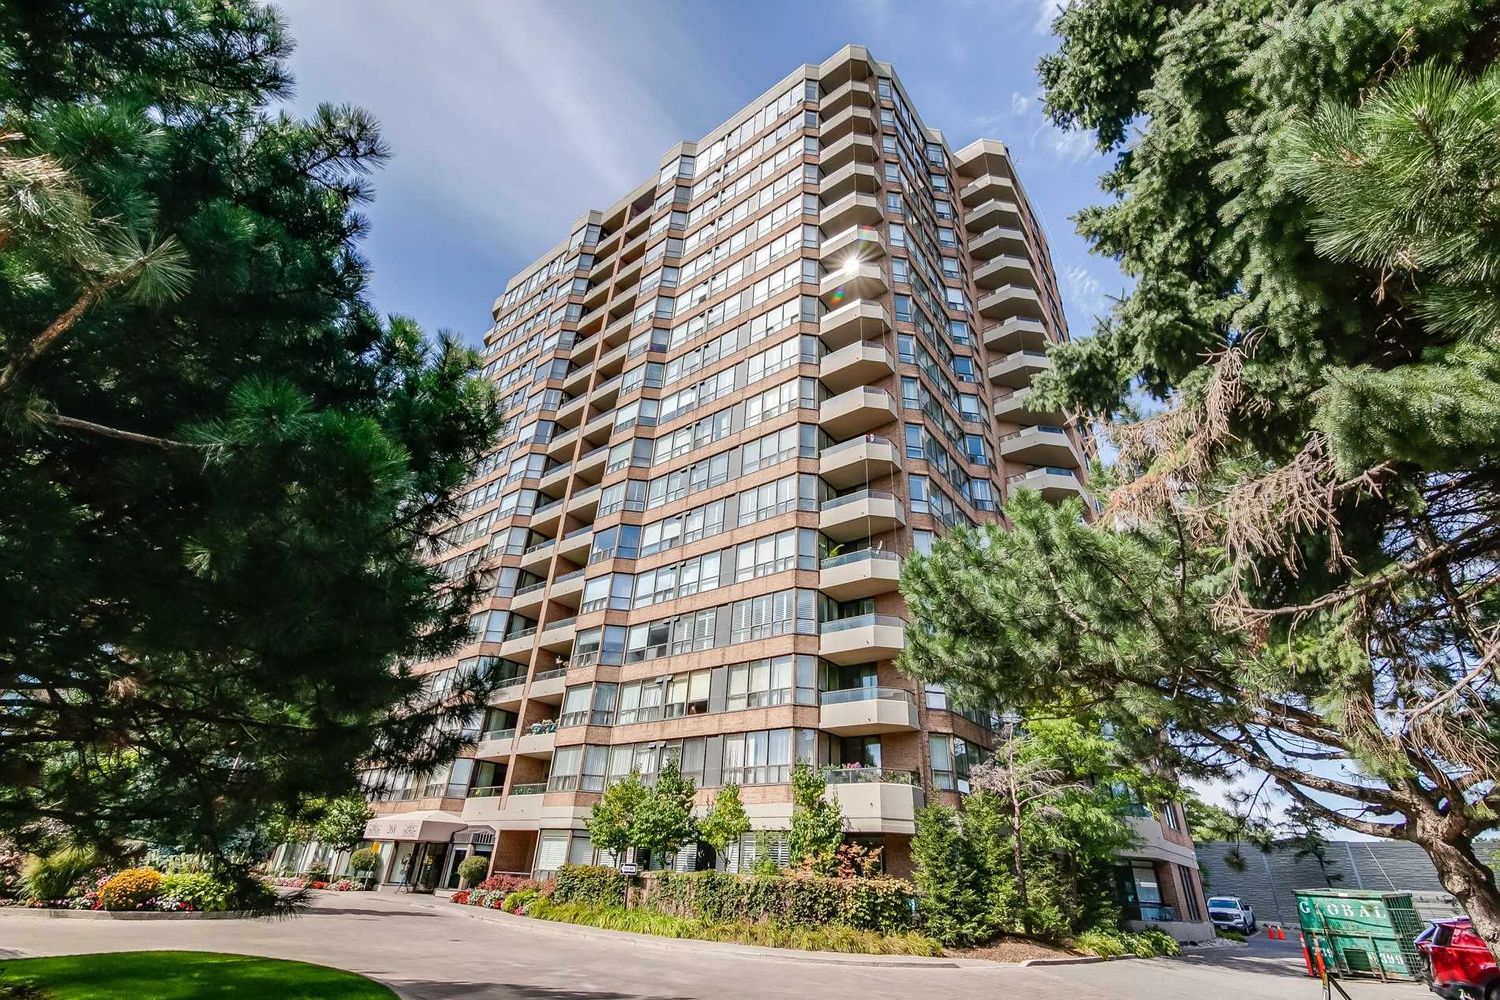 268 Ridley Boulevard. Ridley Boulevard II Condos is located in  North York, Toronto - image #1 of 3